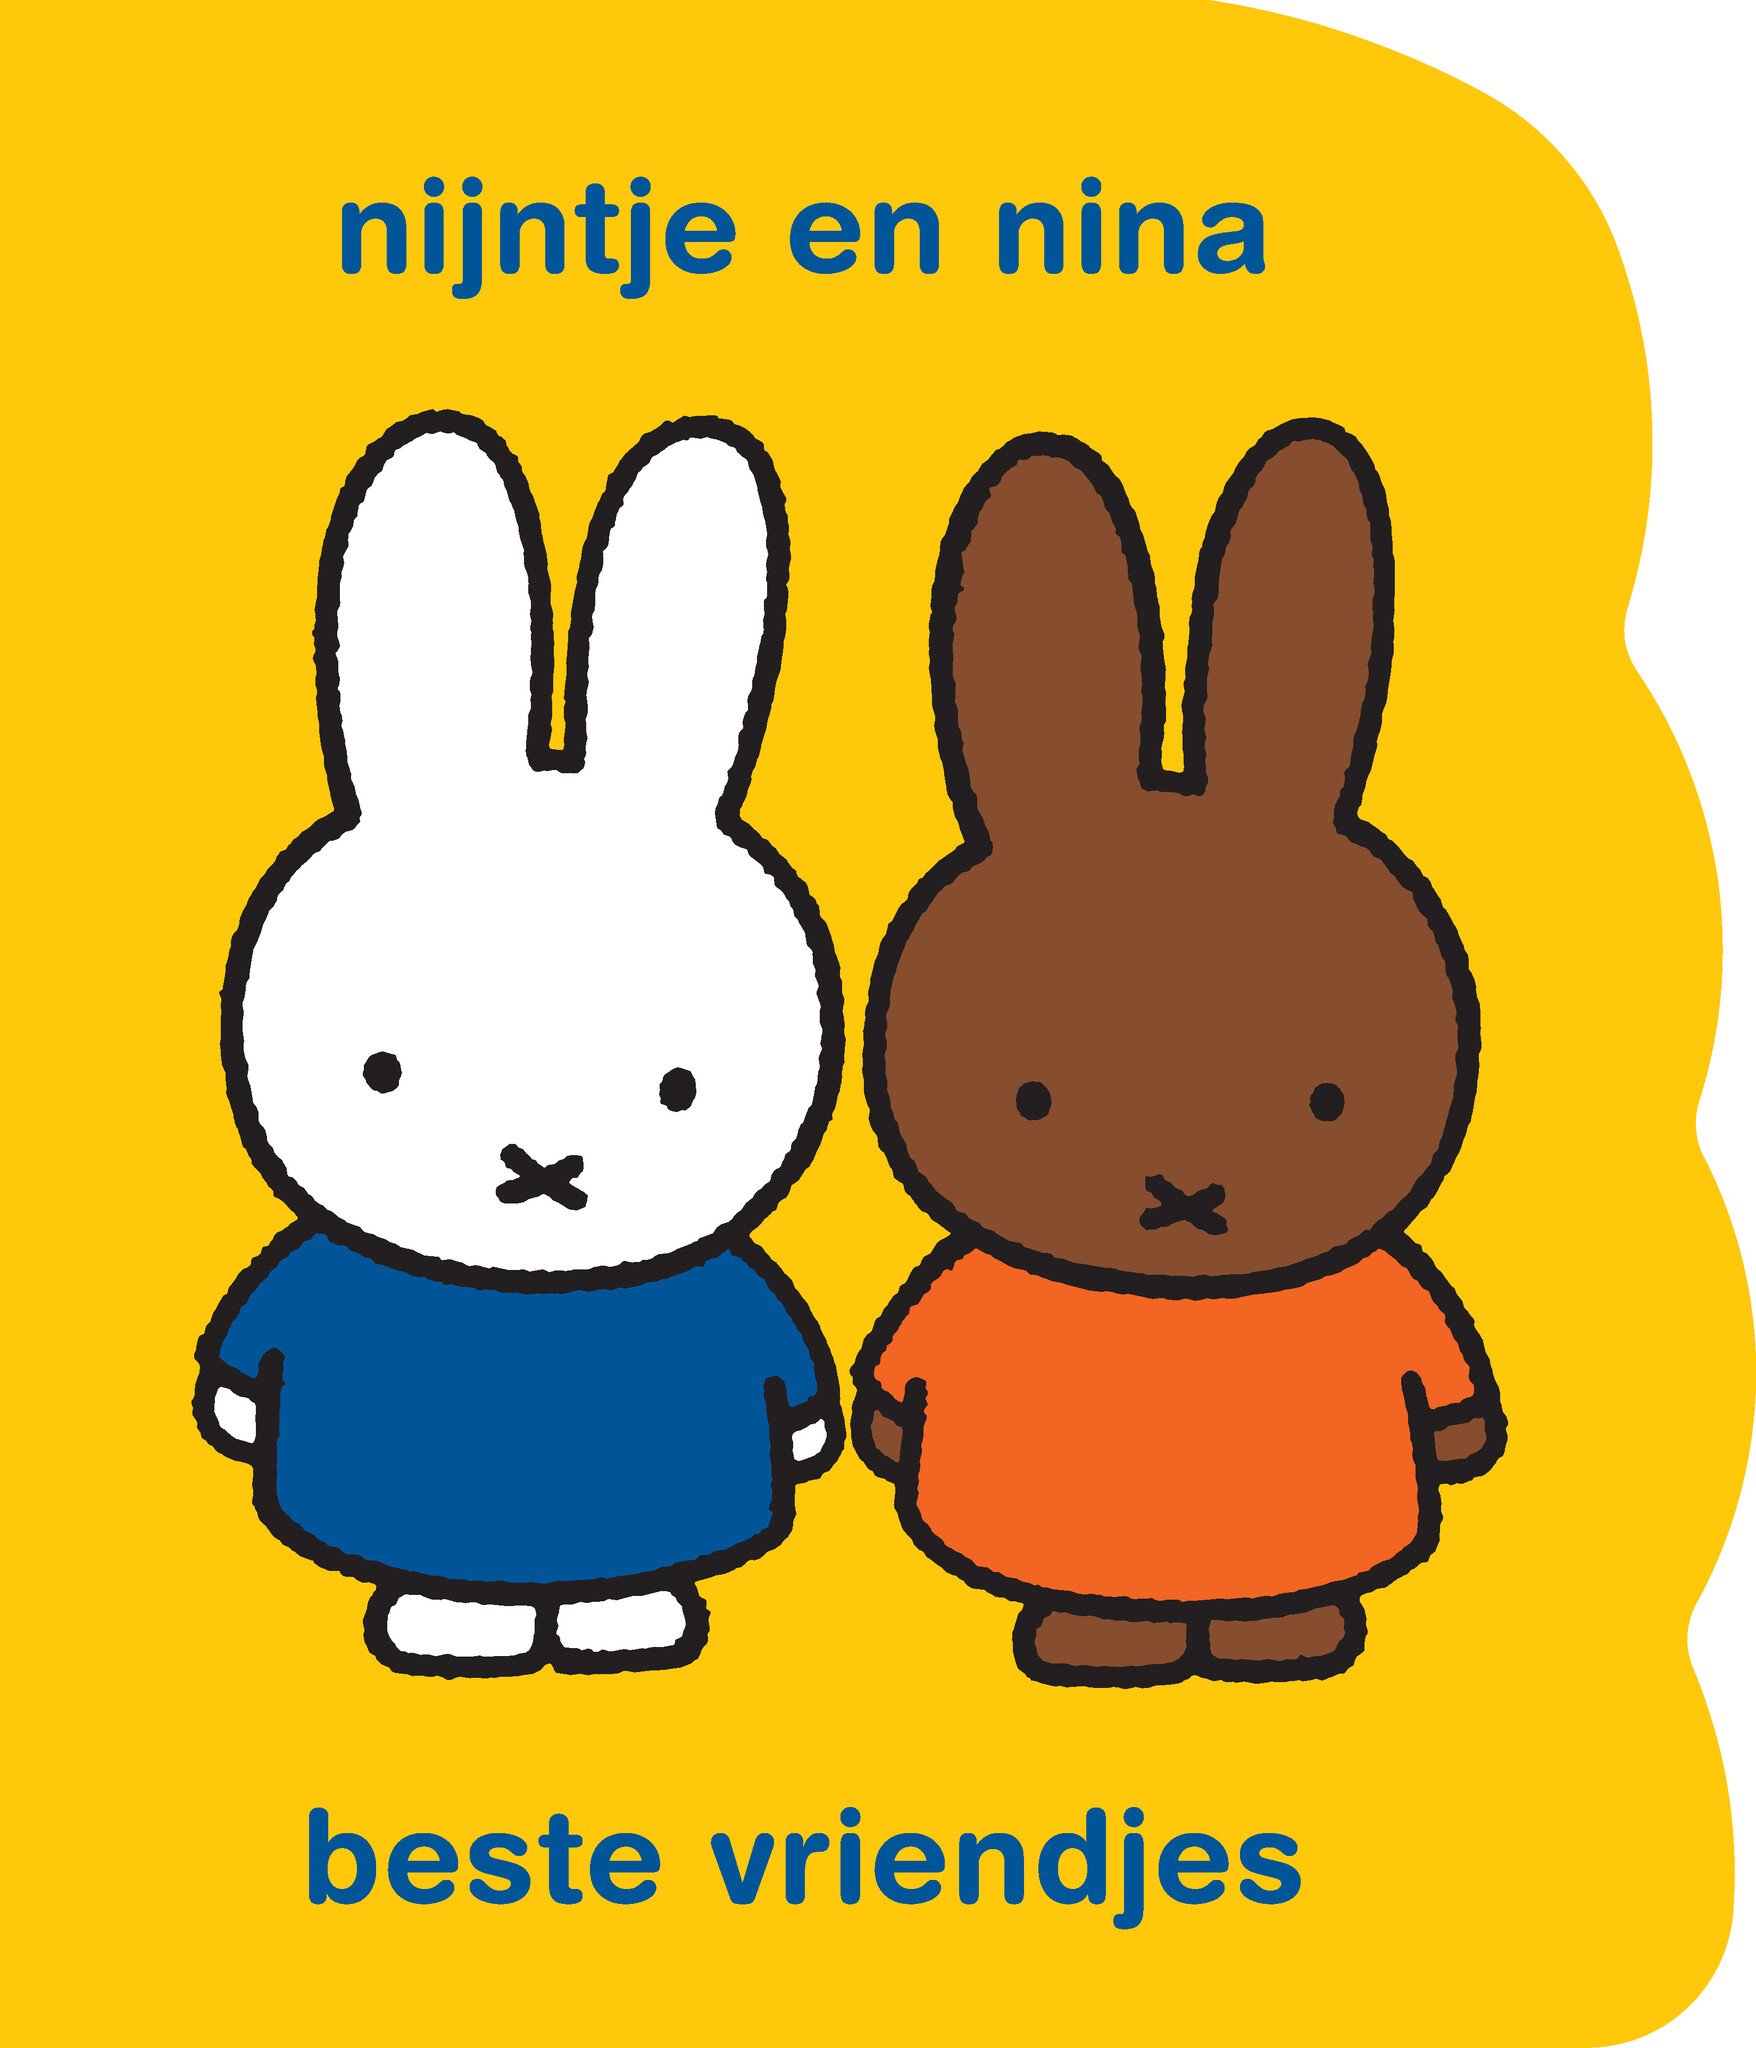 miffy and friends cartoon clipart